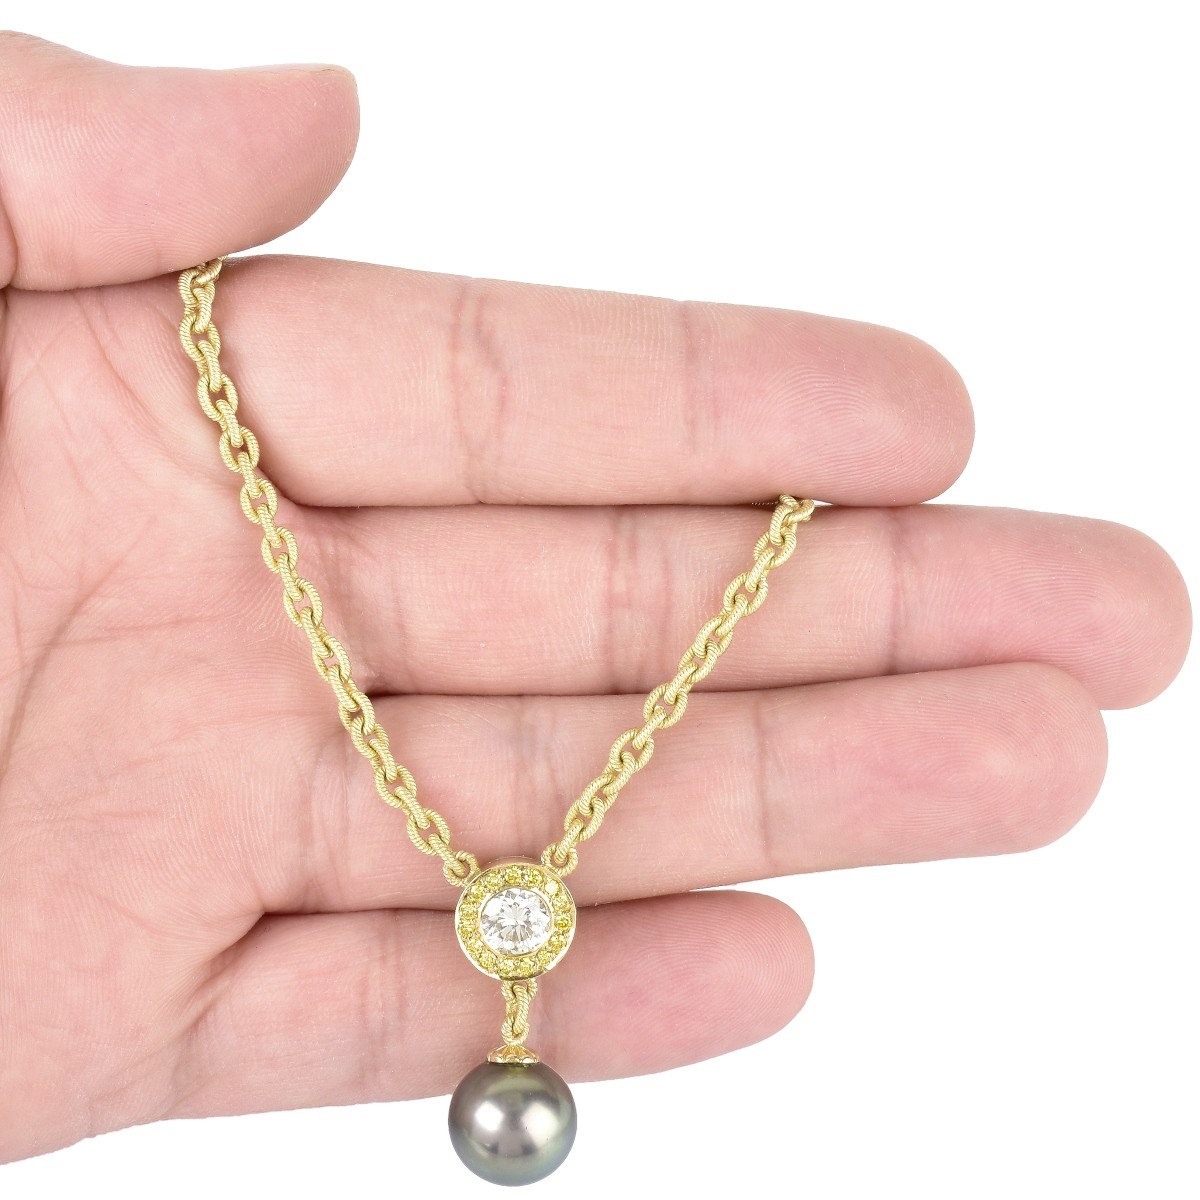 Diamond, South Sea Pearl and 18K Gold Necklace